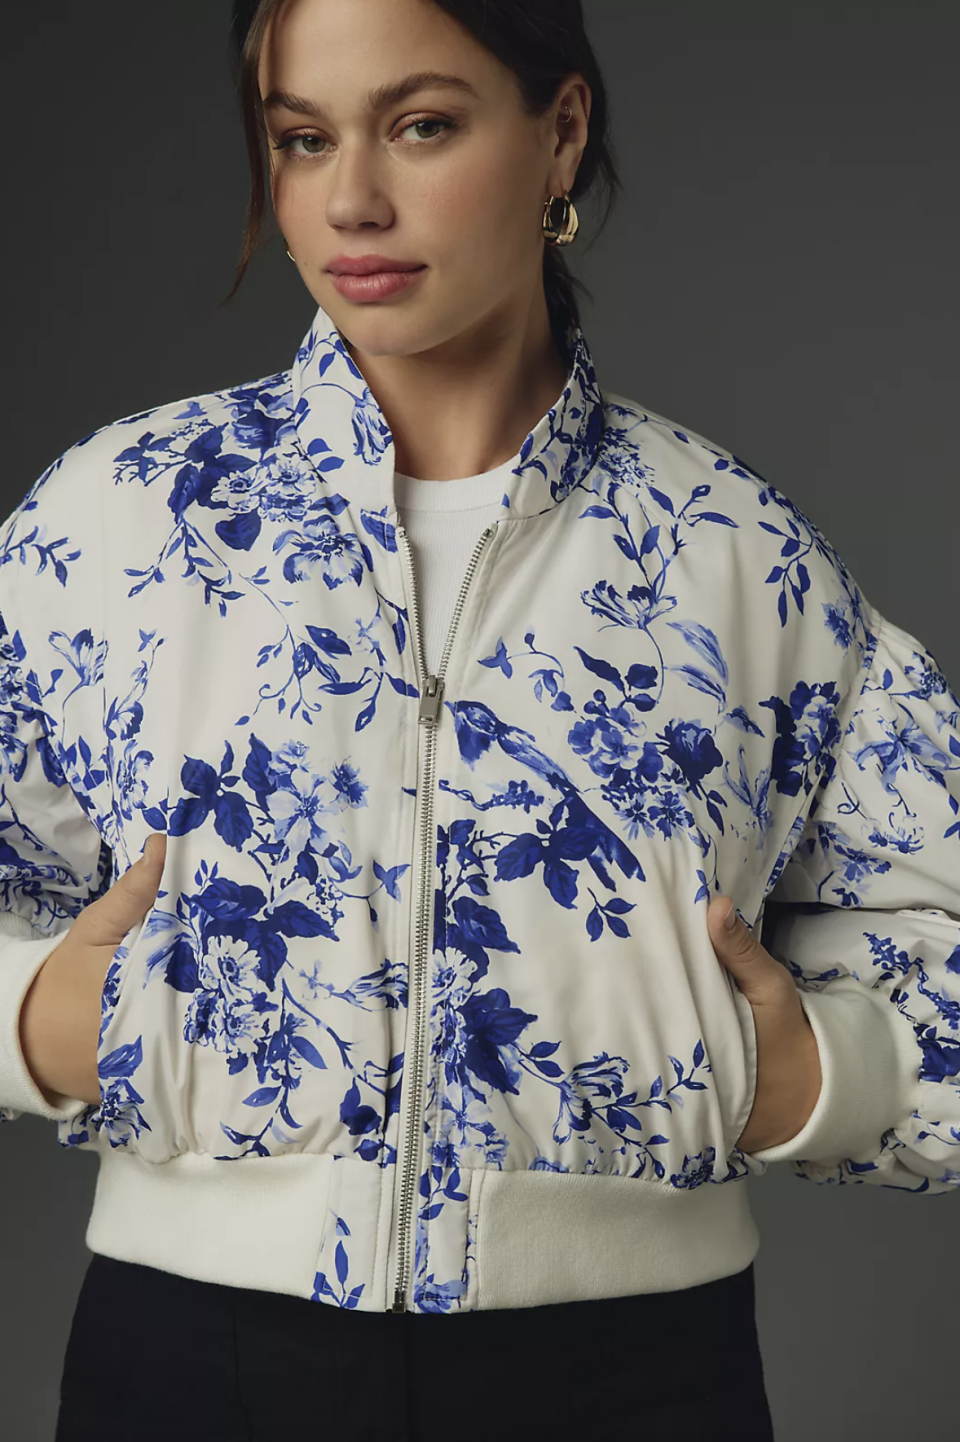 By Anthropologie Cropped Bomber Jacket (Photo via Anthropologie)